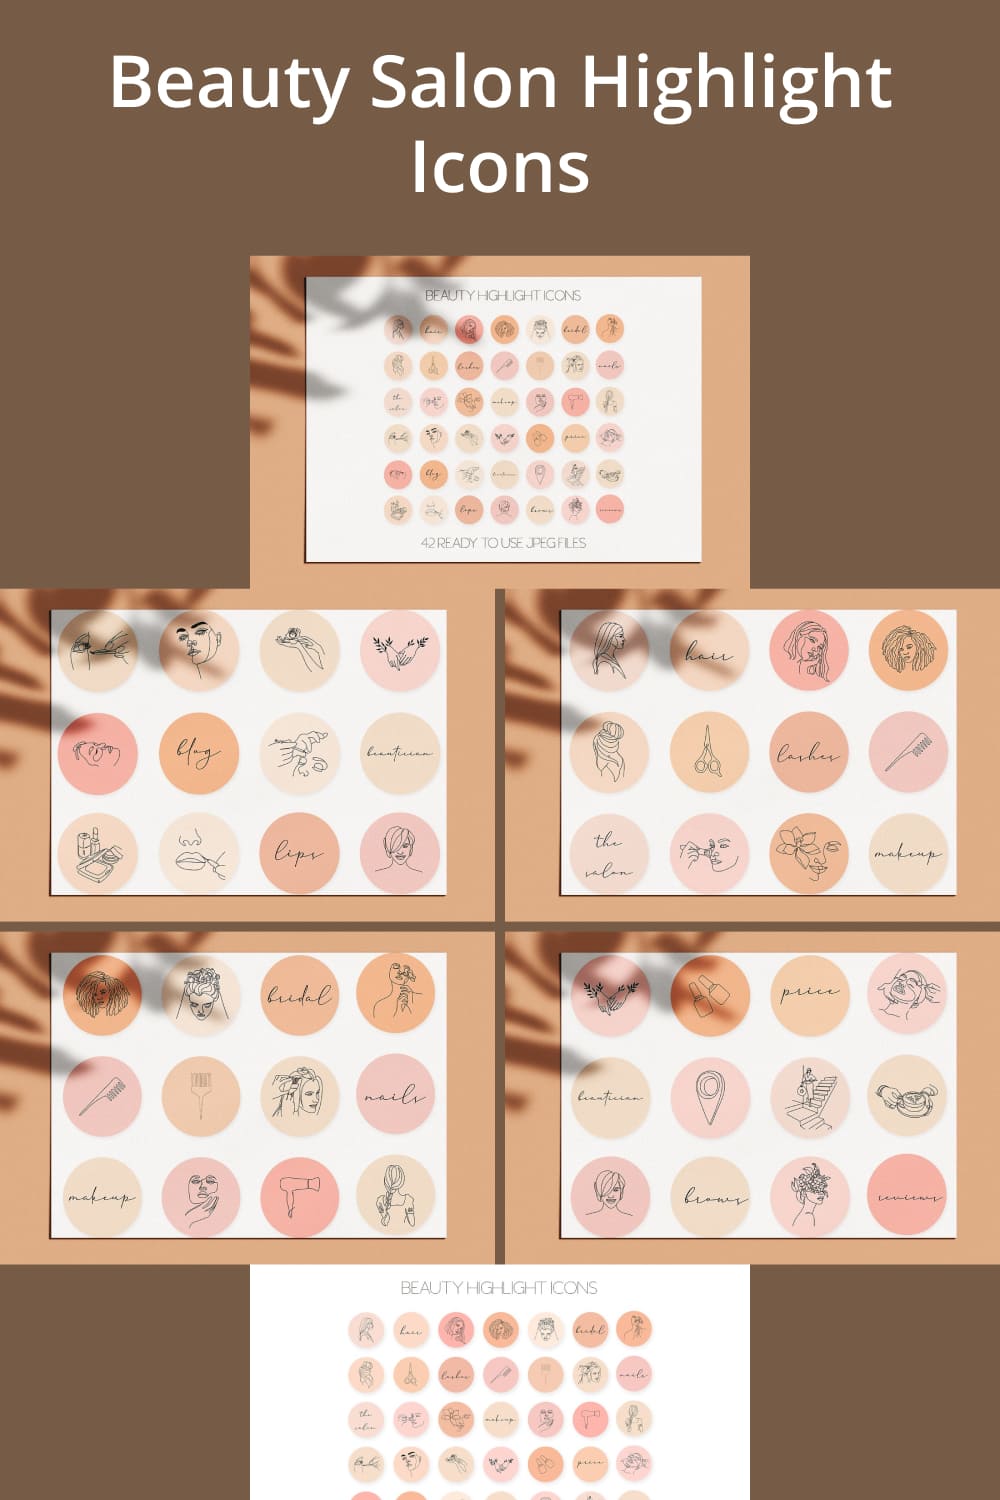 Beauty Salon Highlight Icons - pinterest image preview.